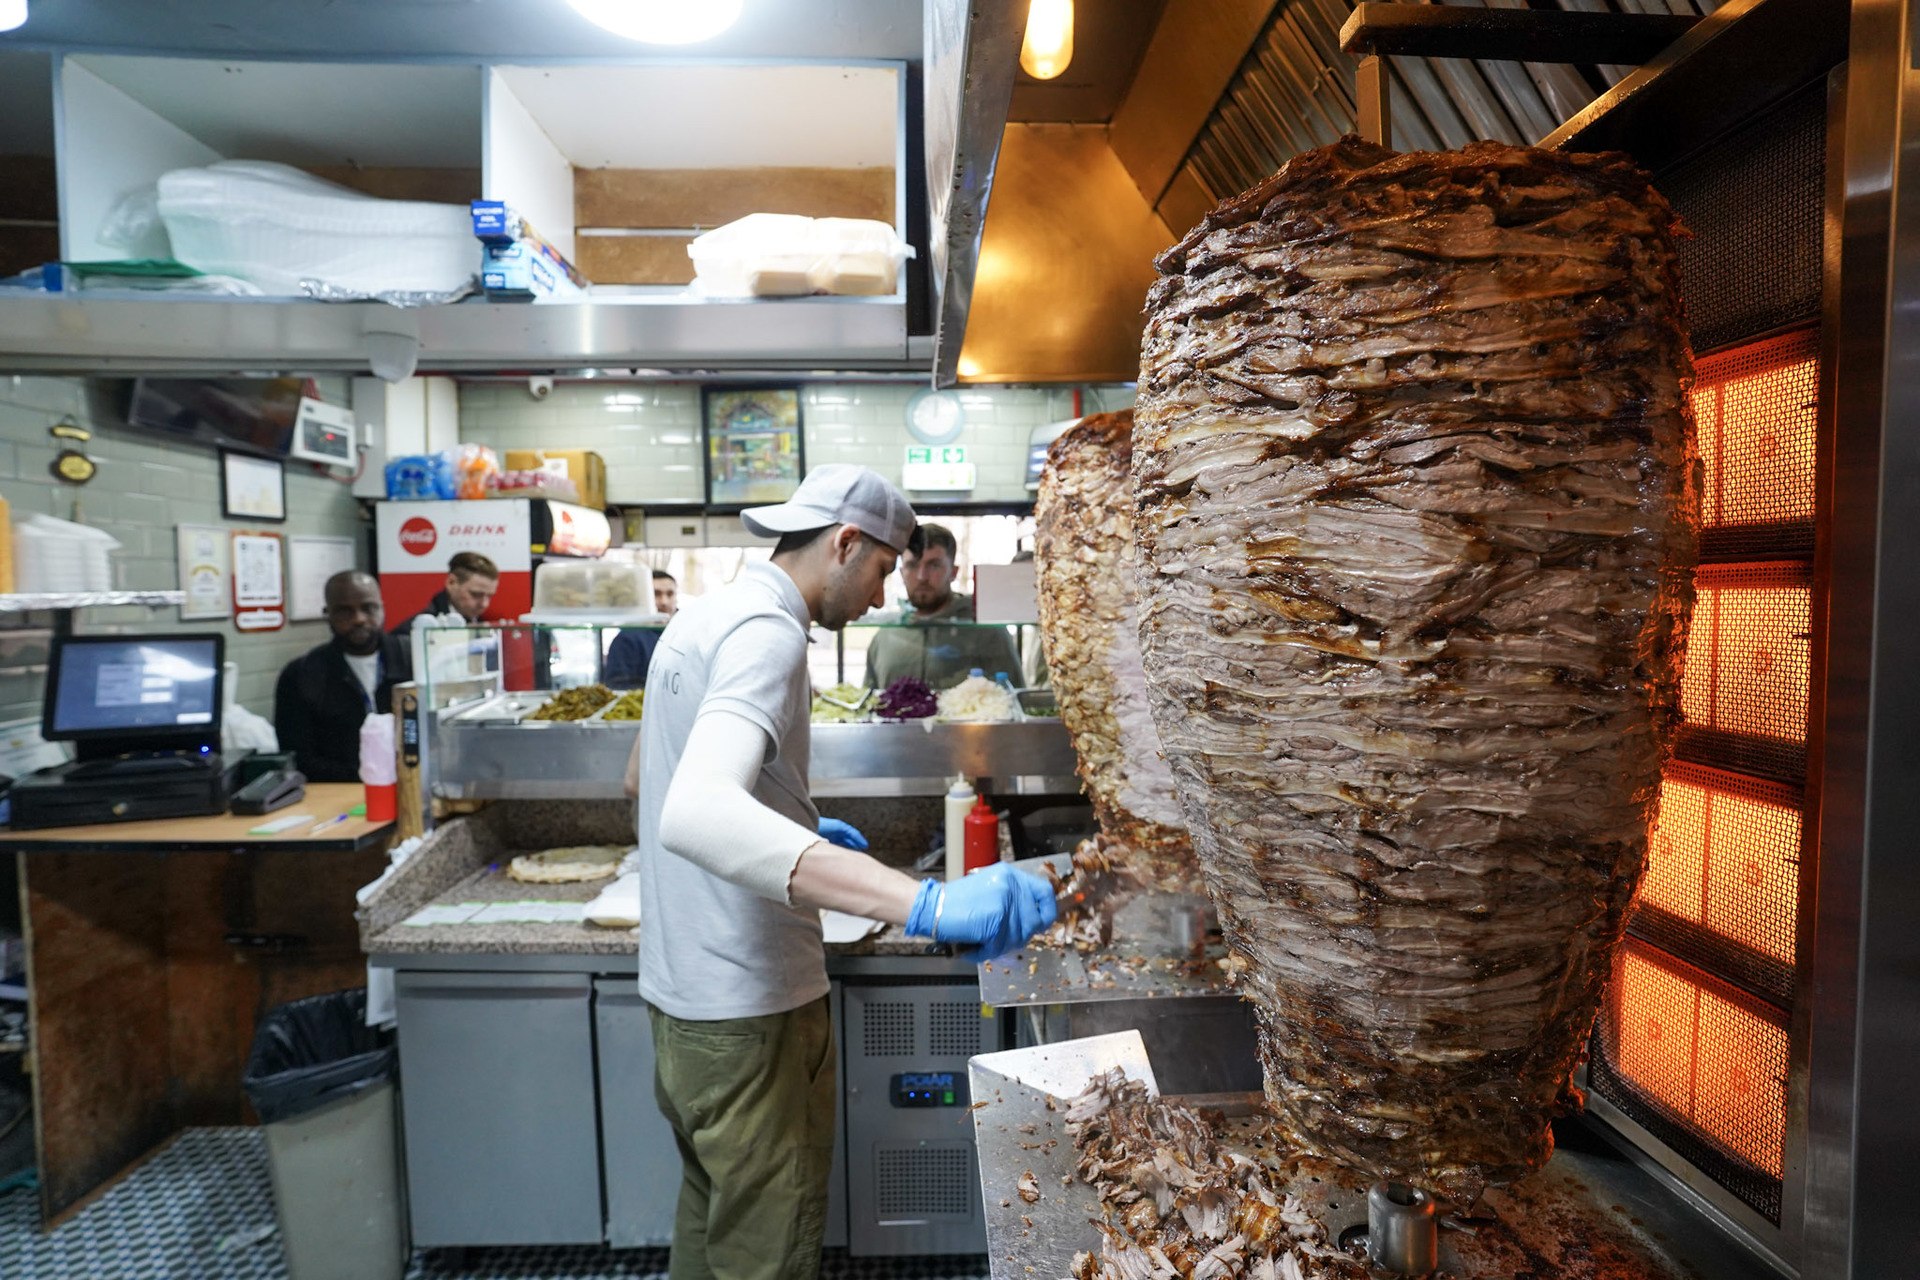 Shawarma King is open from 11am until 12 midnight, seven days a week